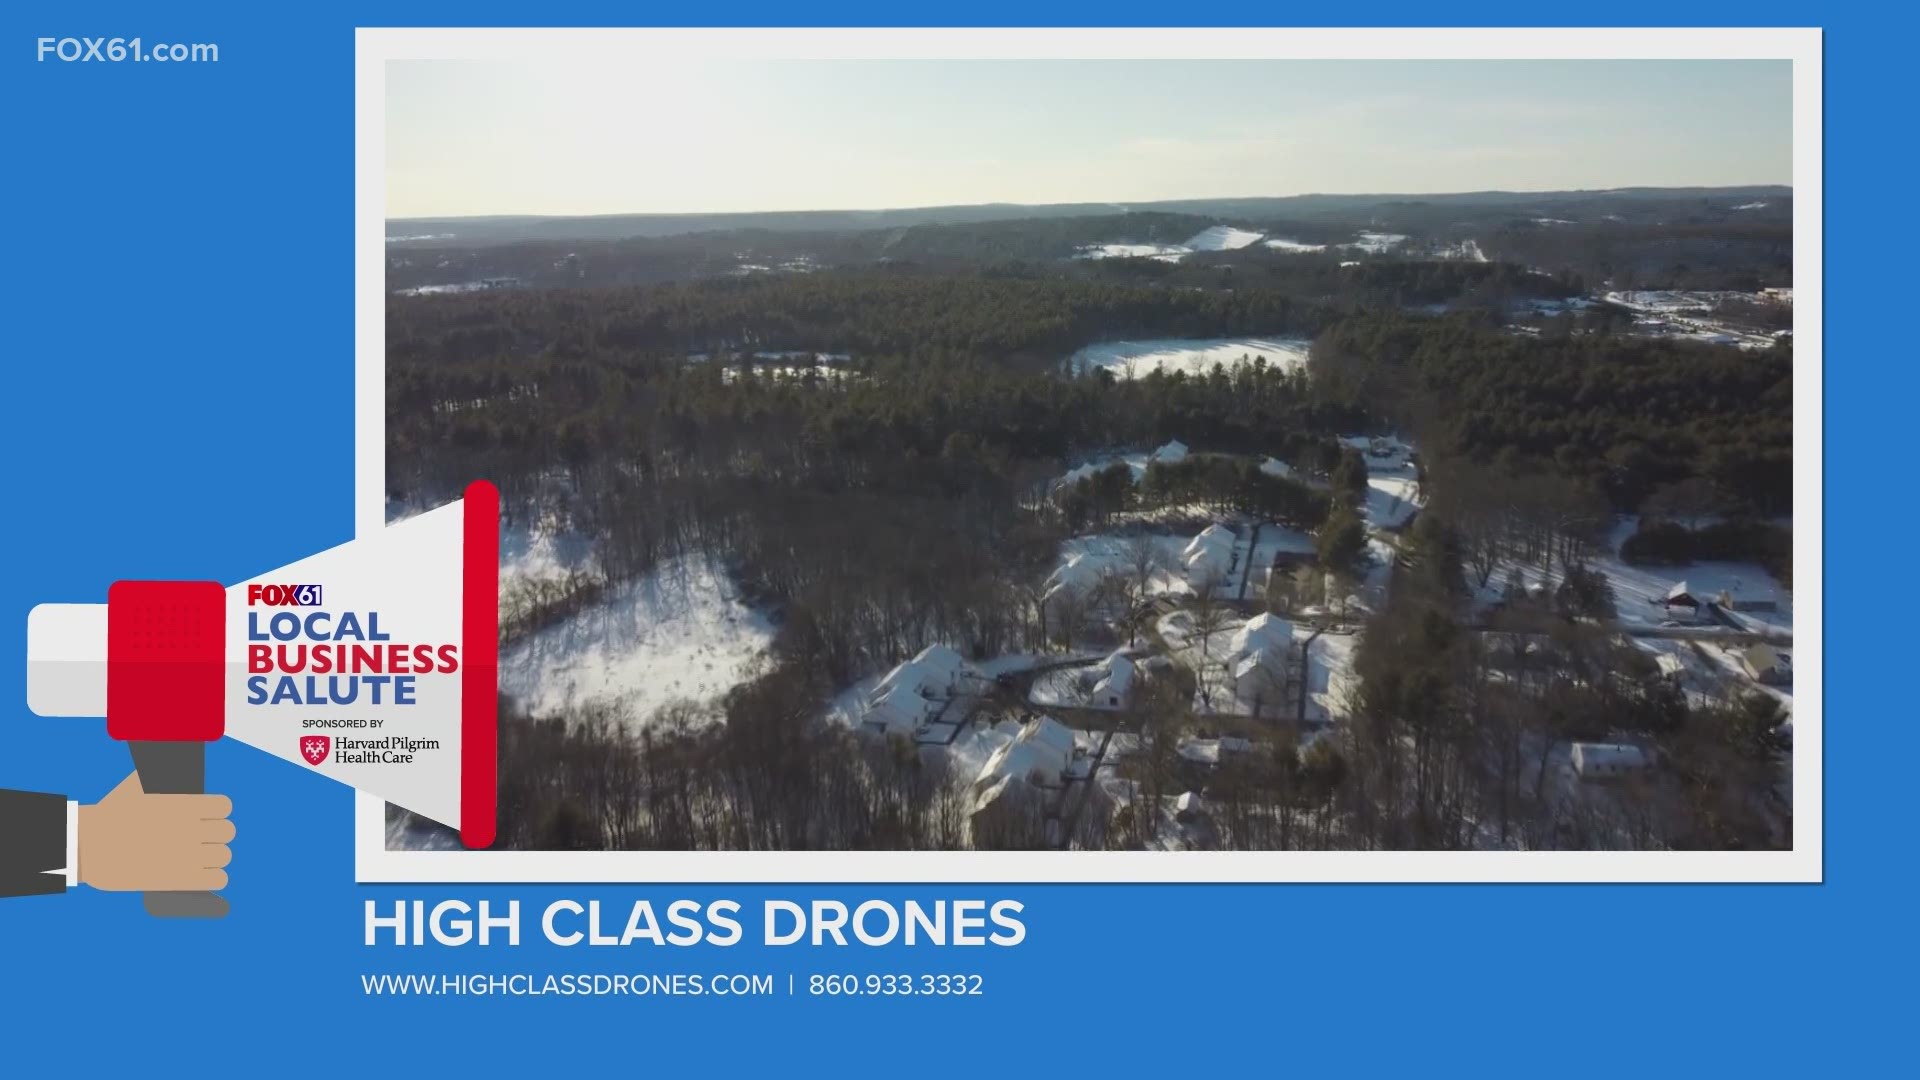 At High-Class Drones, they are dedicated to providing you with images of the highest quality and stellar professional service.